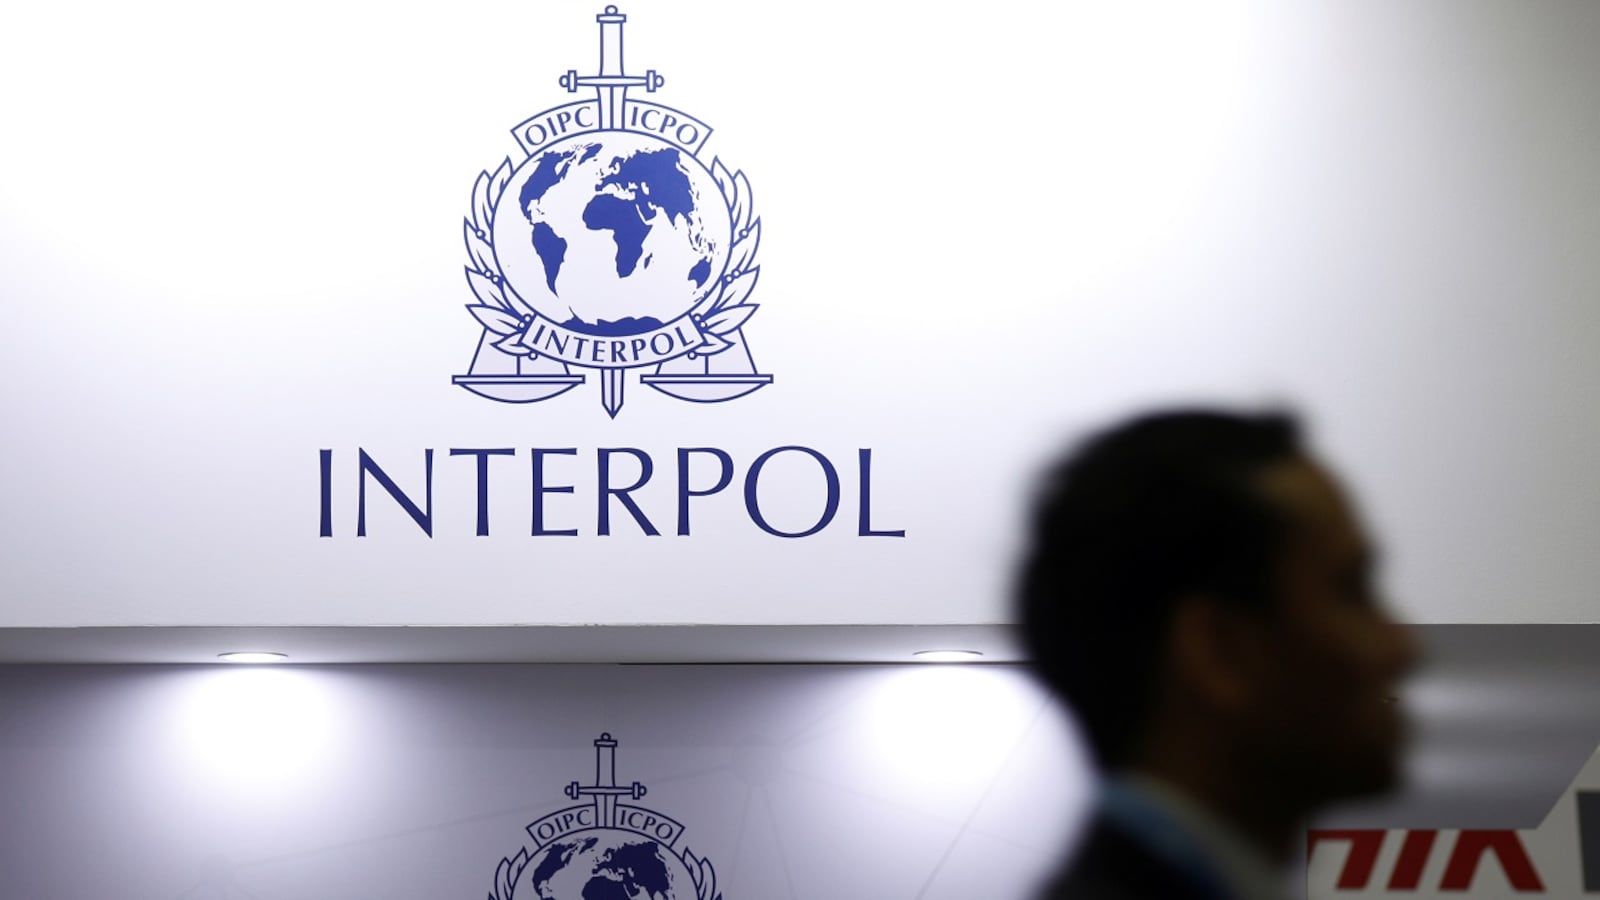 Letters contaminated with coronavirus may be sent to political leaders: Interpol